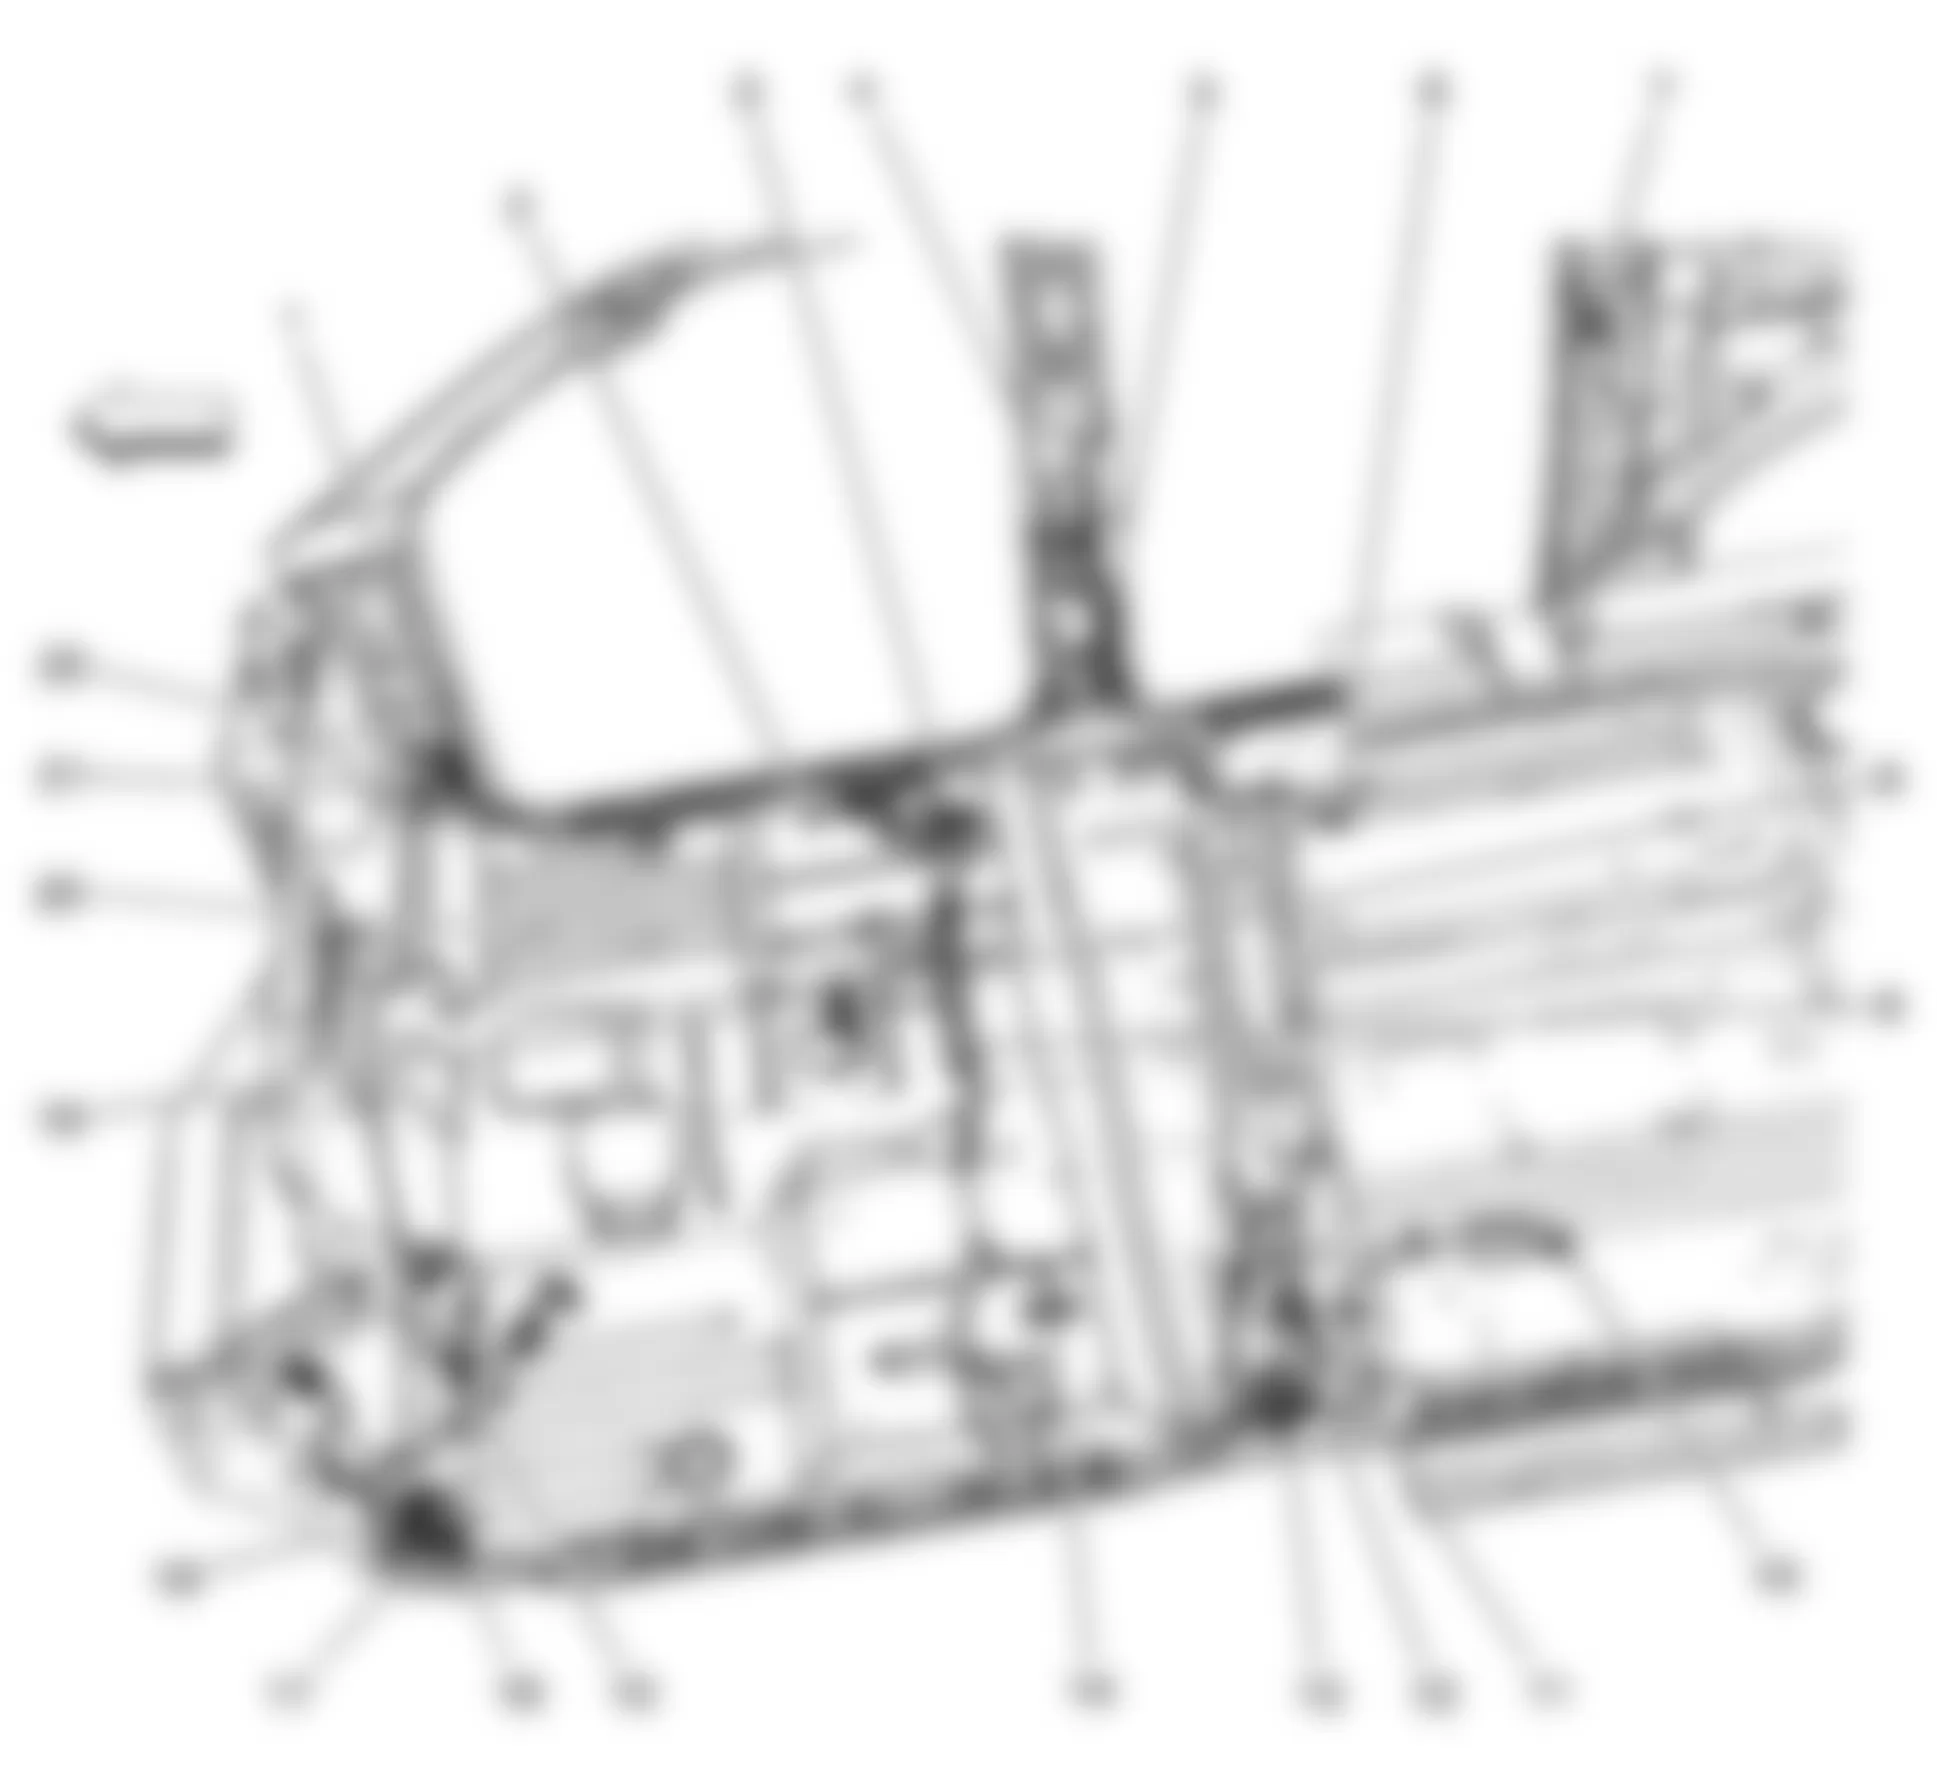 GMC Yukon 2009 - Component Locations -  Front Passenger Compartment (Long Wheel Base)